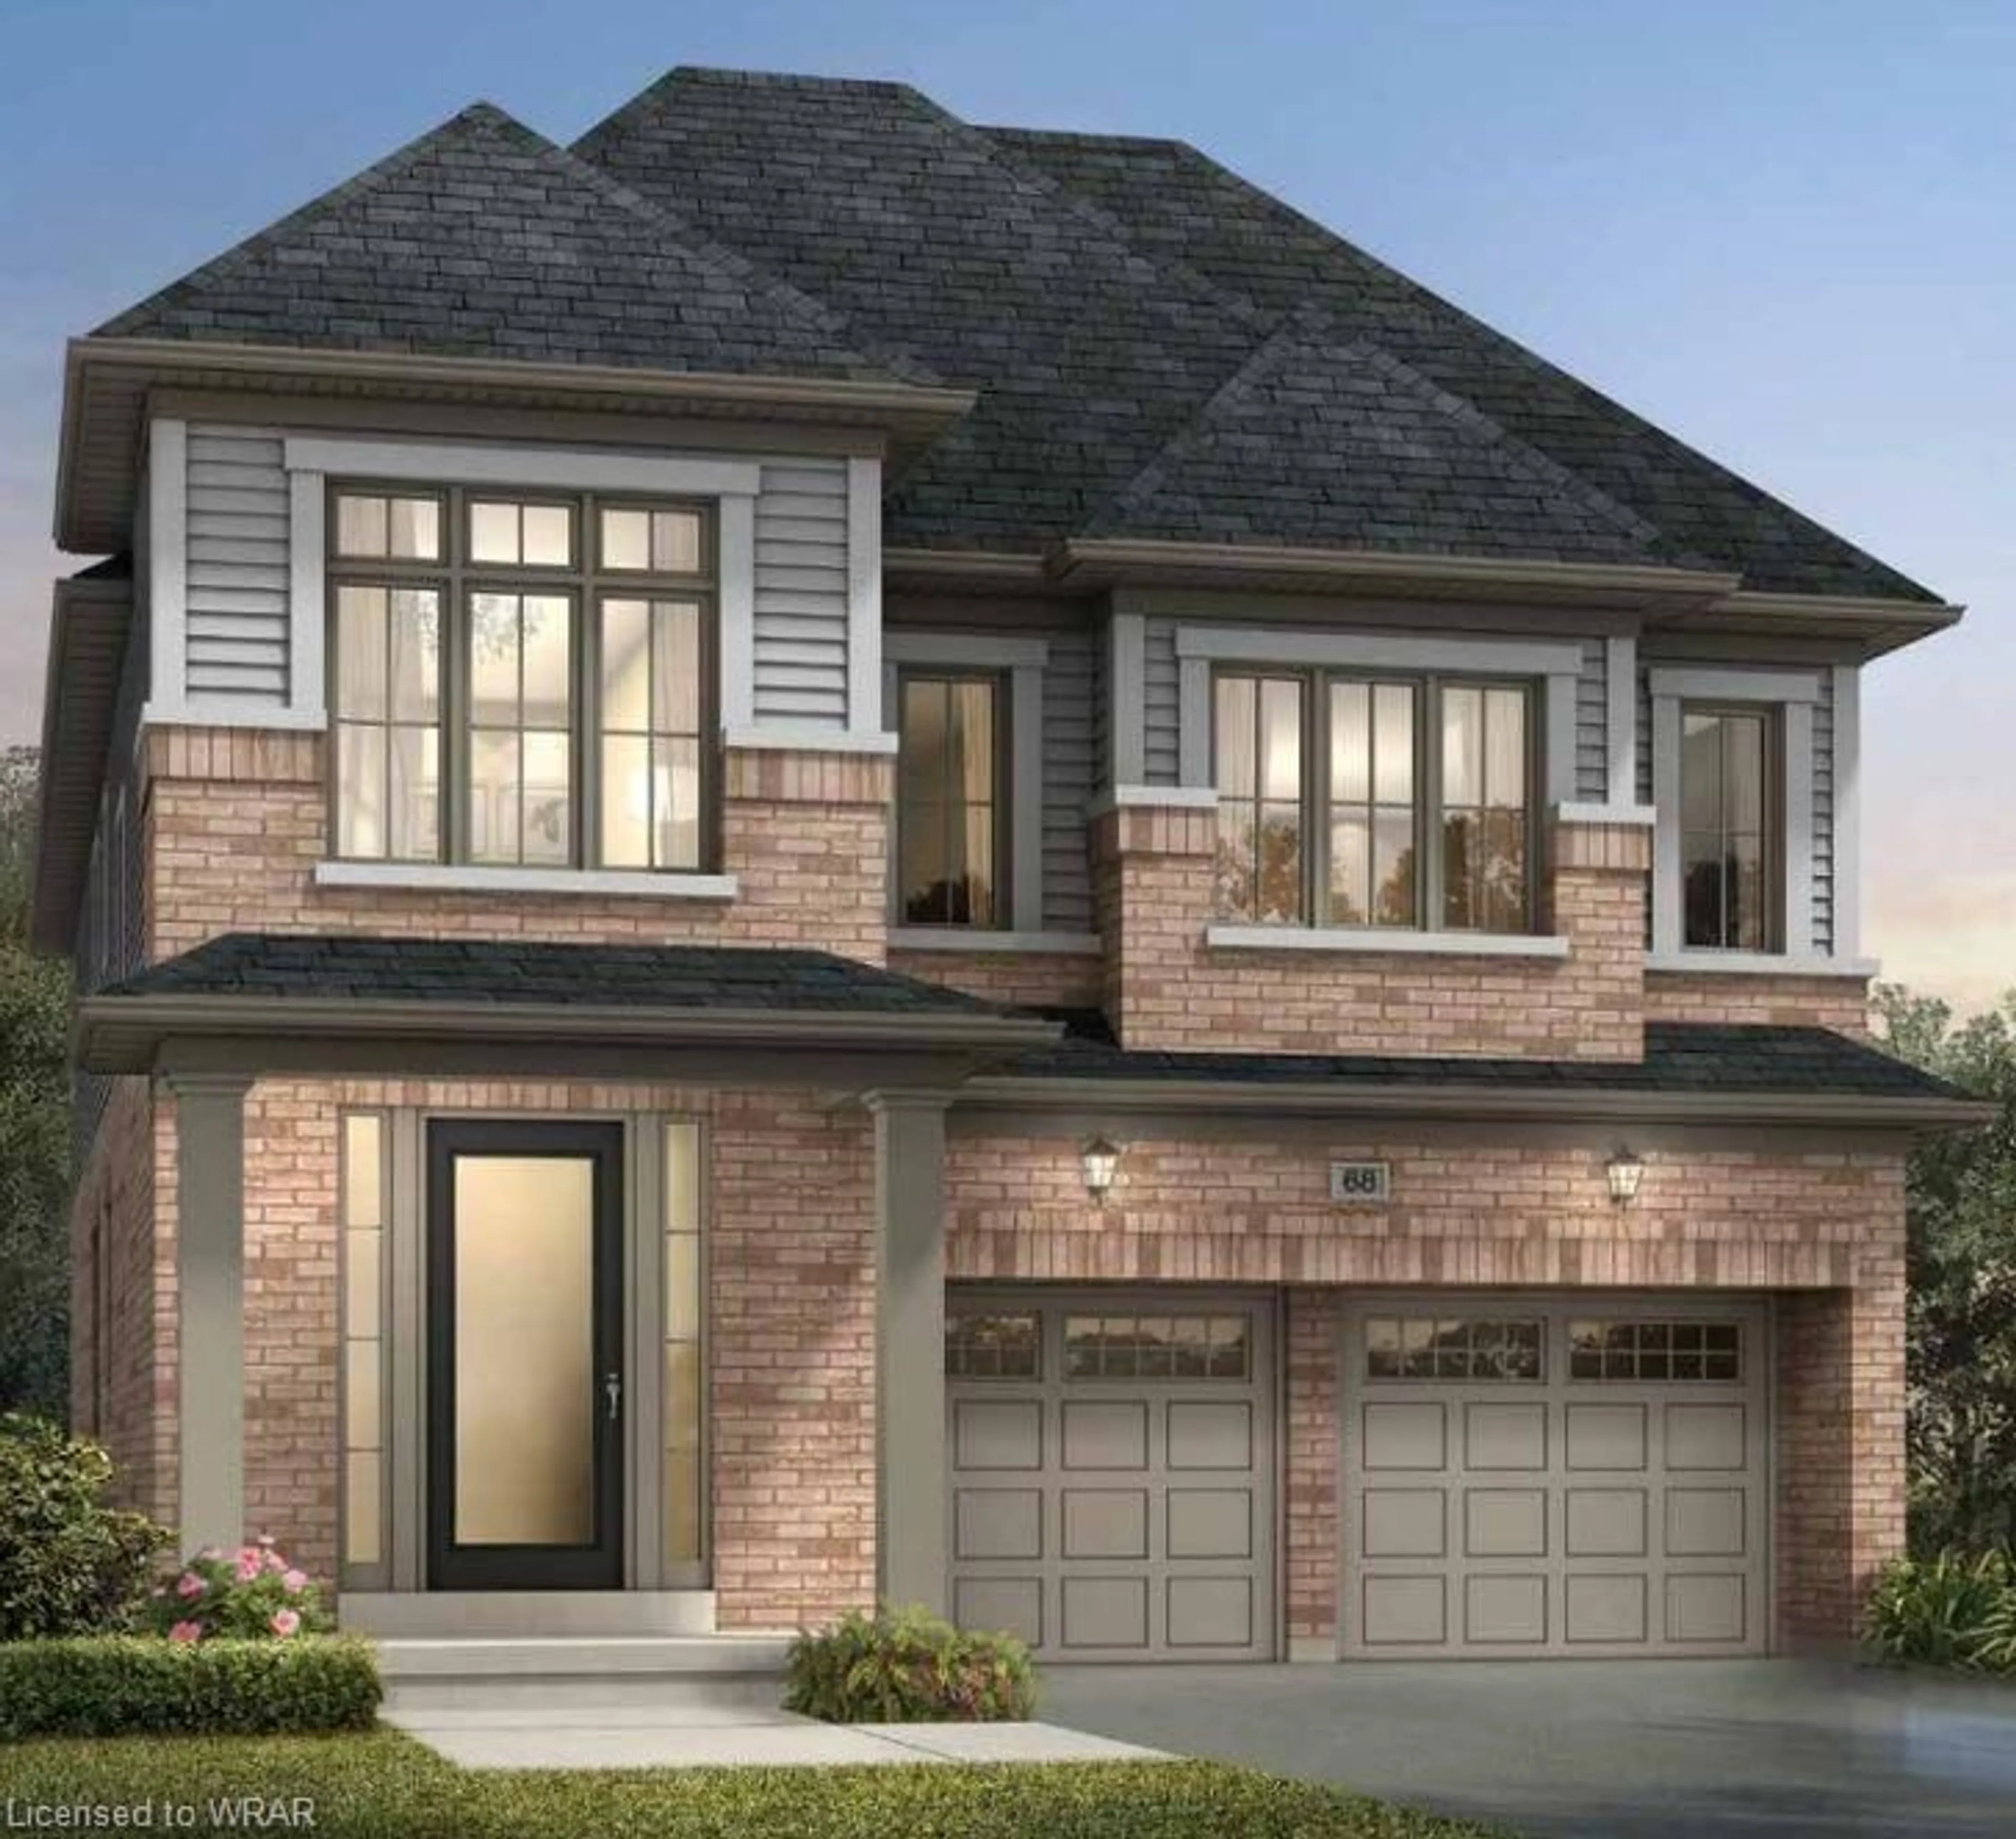 Home with brick exterior material for LOT 67 Langridge Way, Cambridge Ontario N1R 5S3